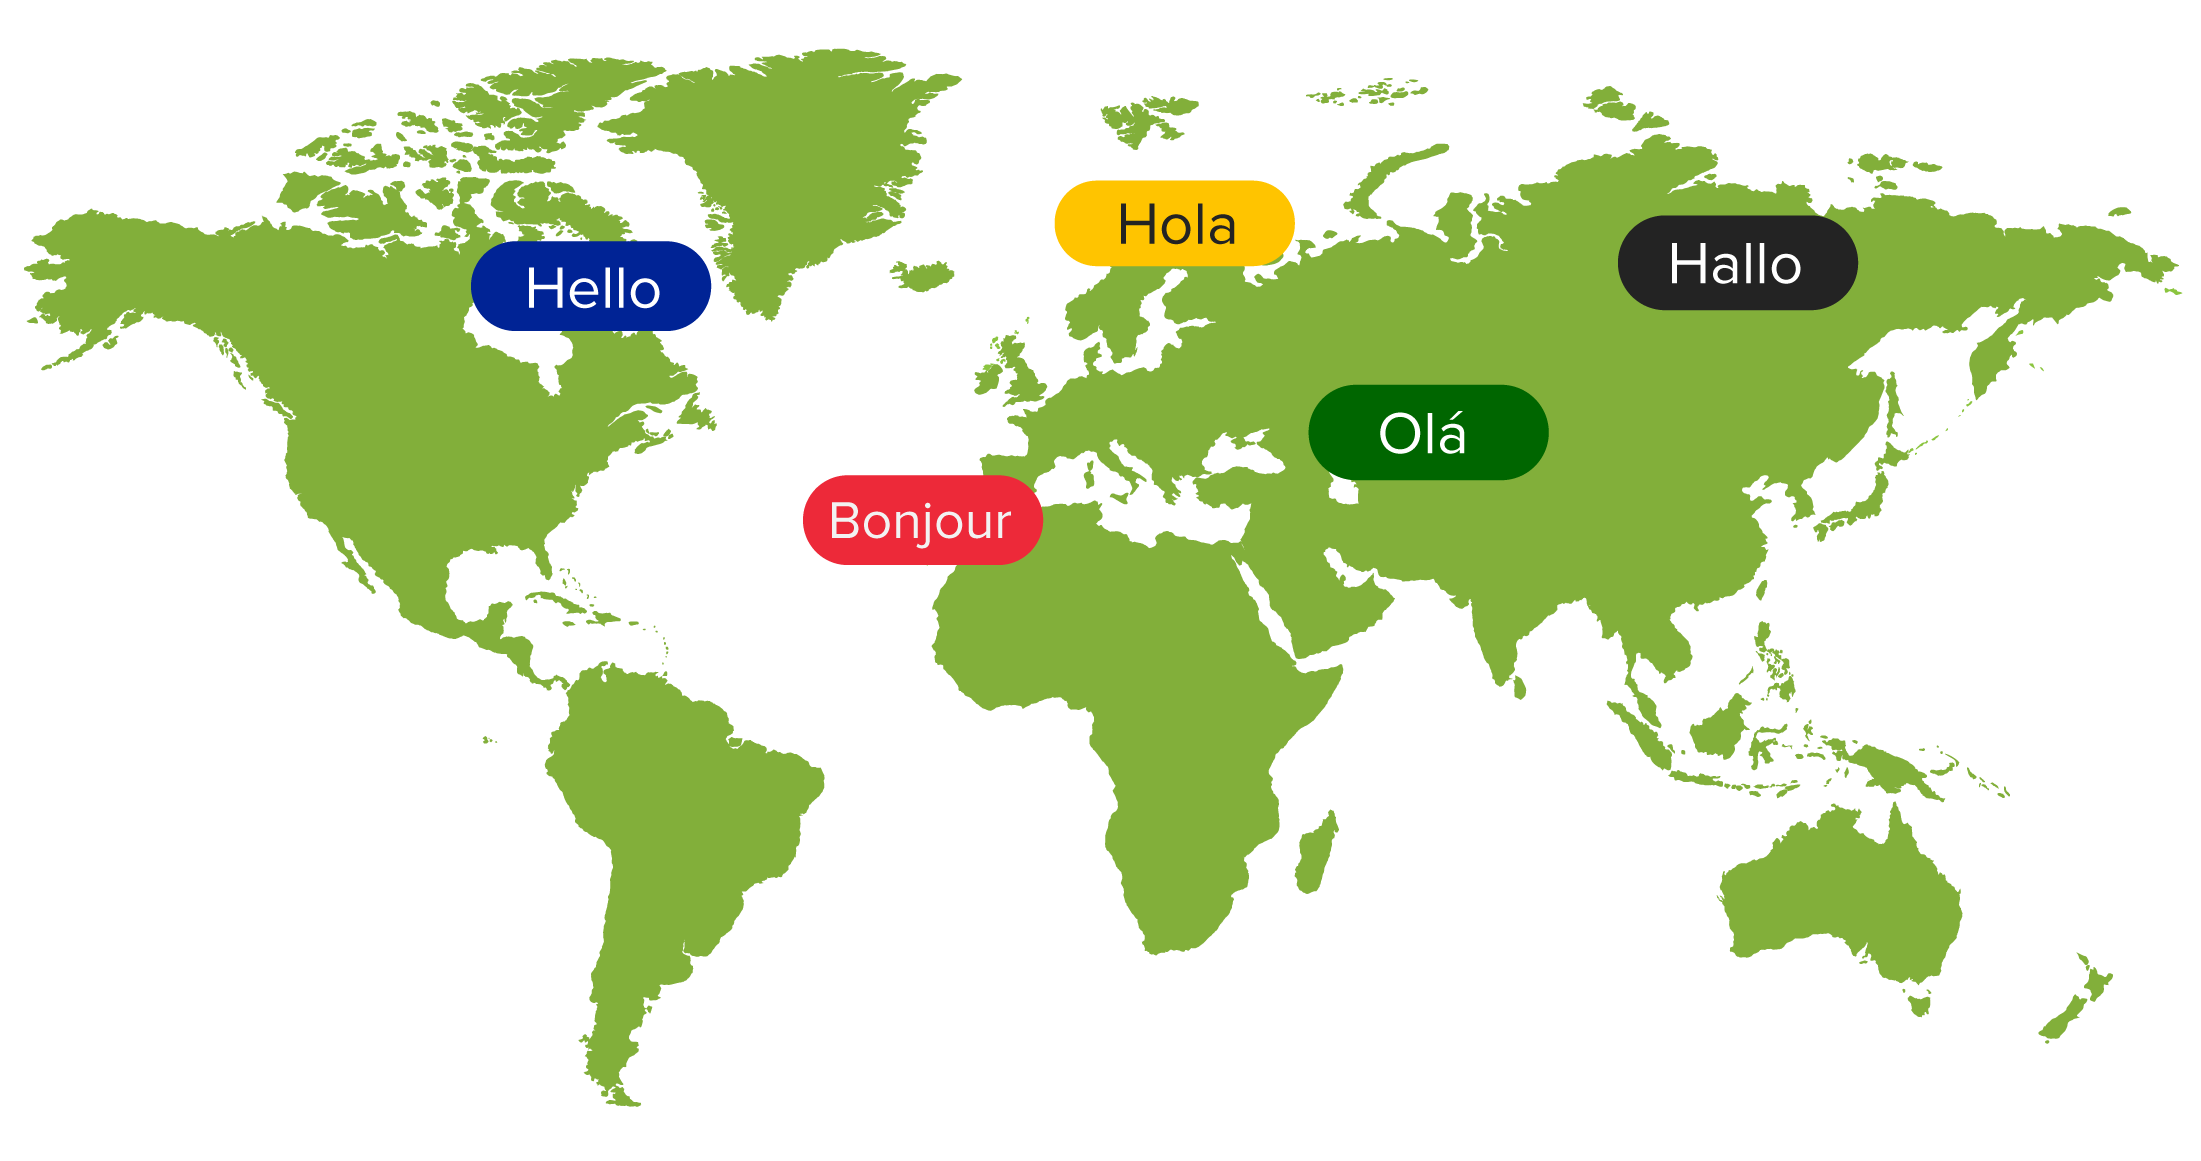 QuickTrials is available around the world in different languages